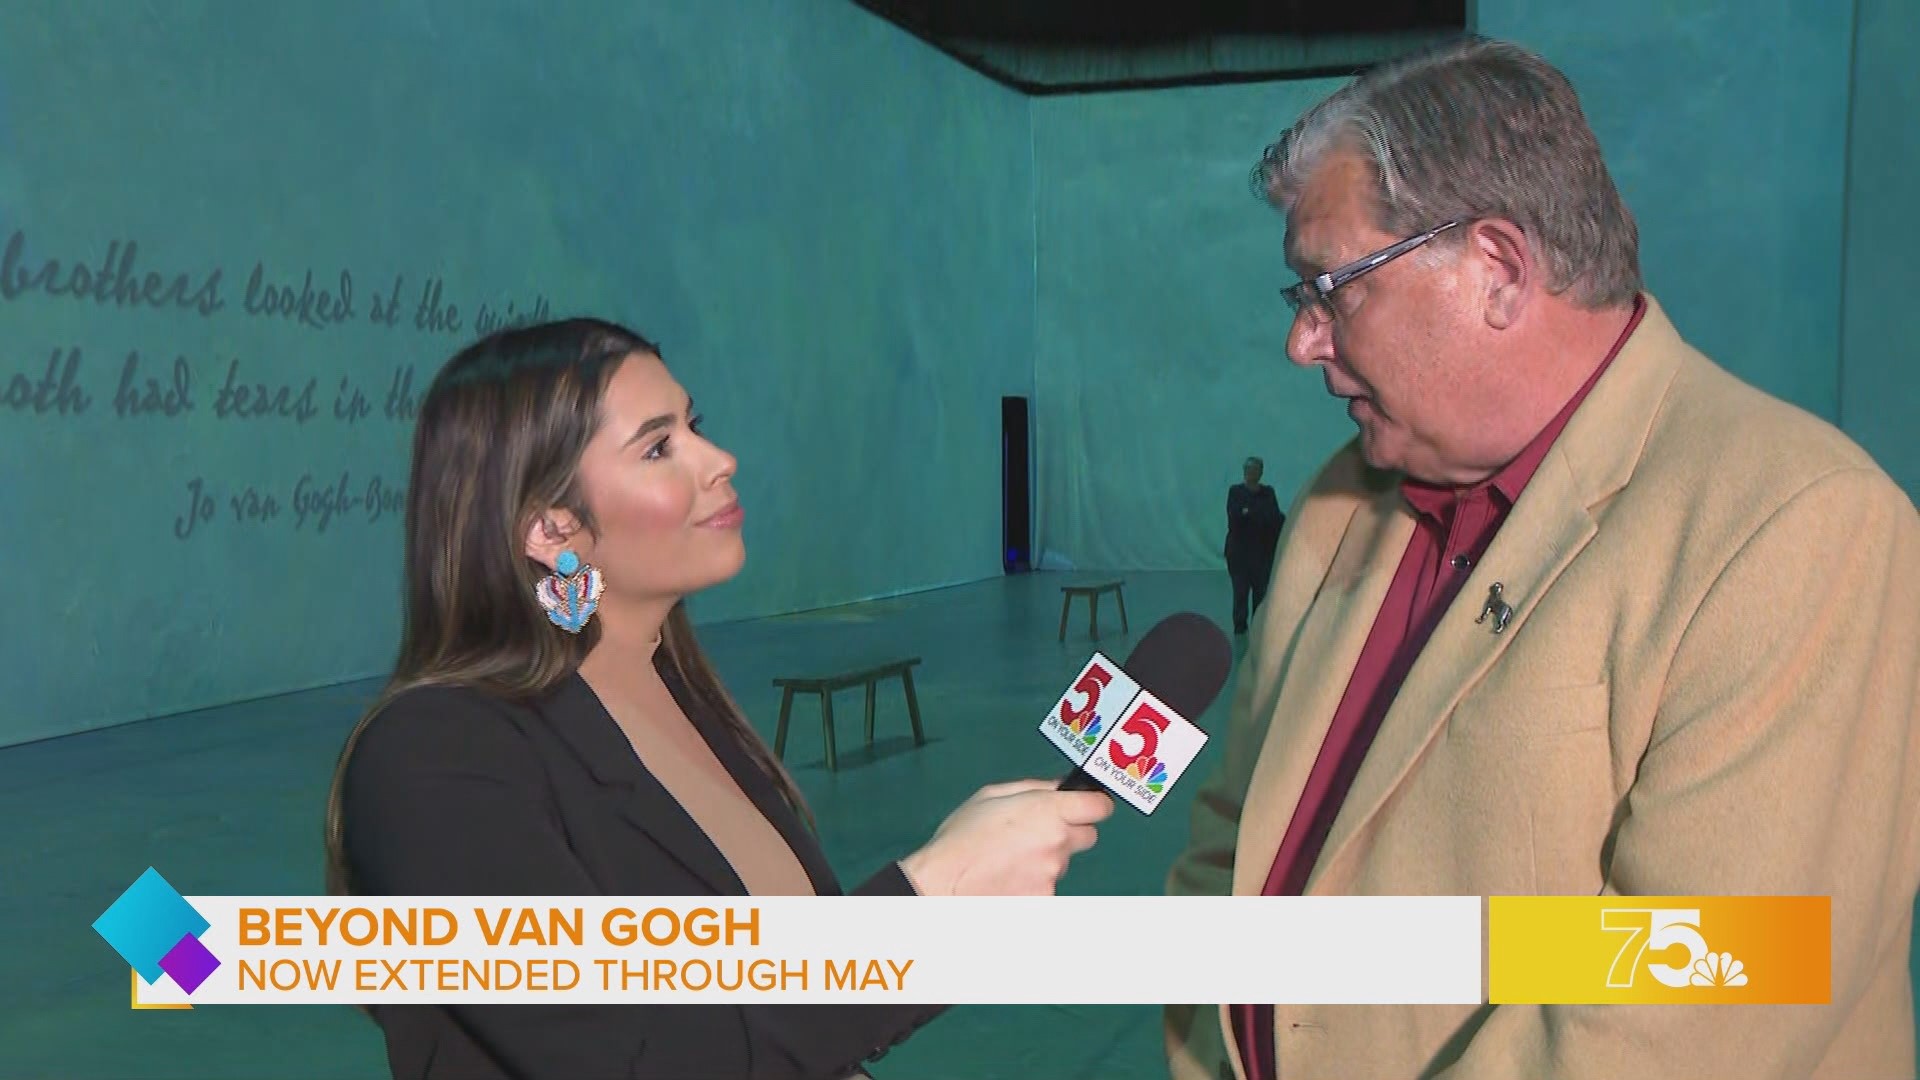 Dana DiPiazza stopped by the Starry Night Pavilion to share the news and share what was planned for Vincent Van Gogh’s birthday.